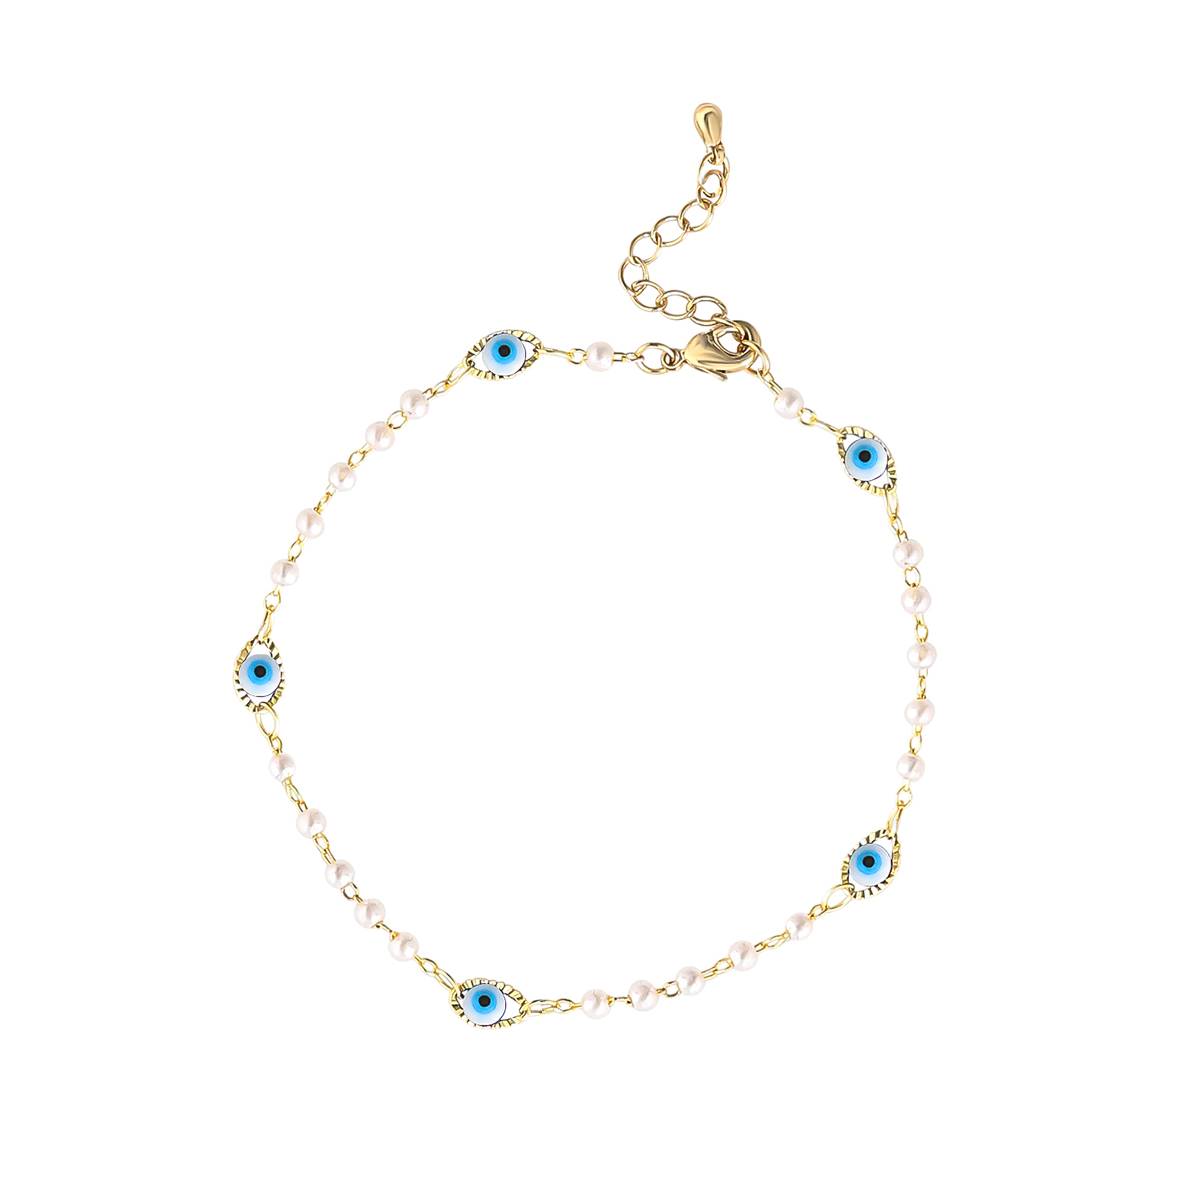 Jessica Simpson Imitation Yellow Gold Plated Evil Eye Anklet Set